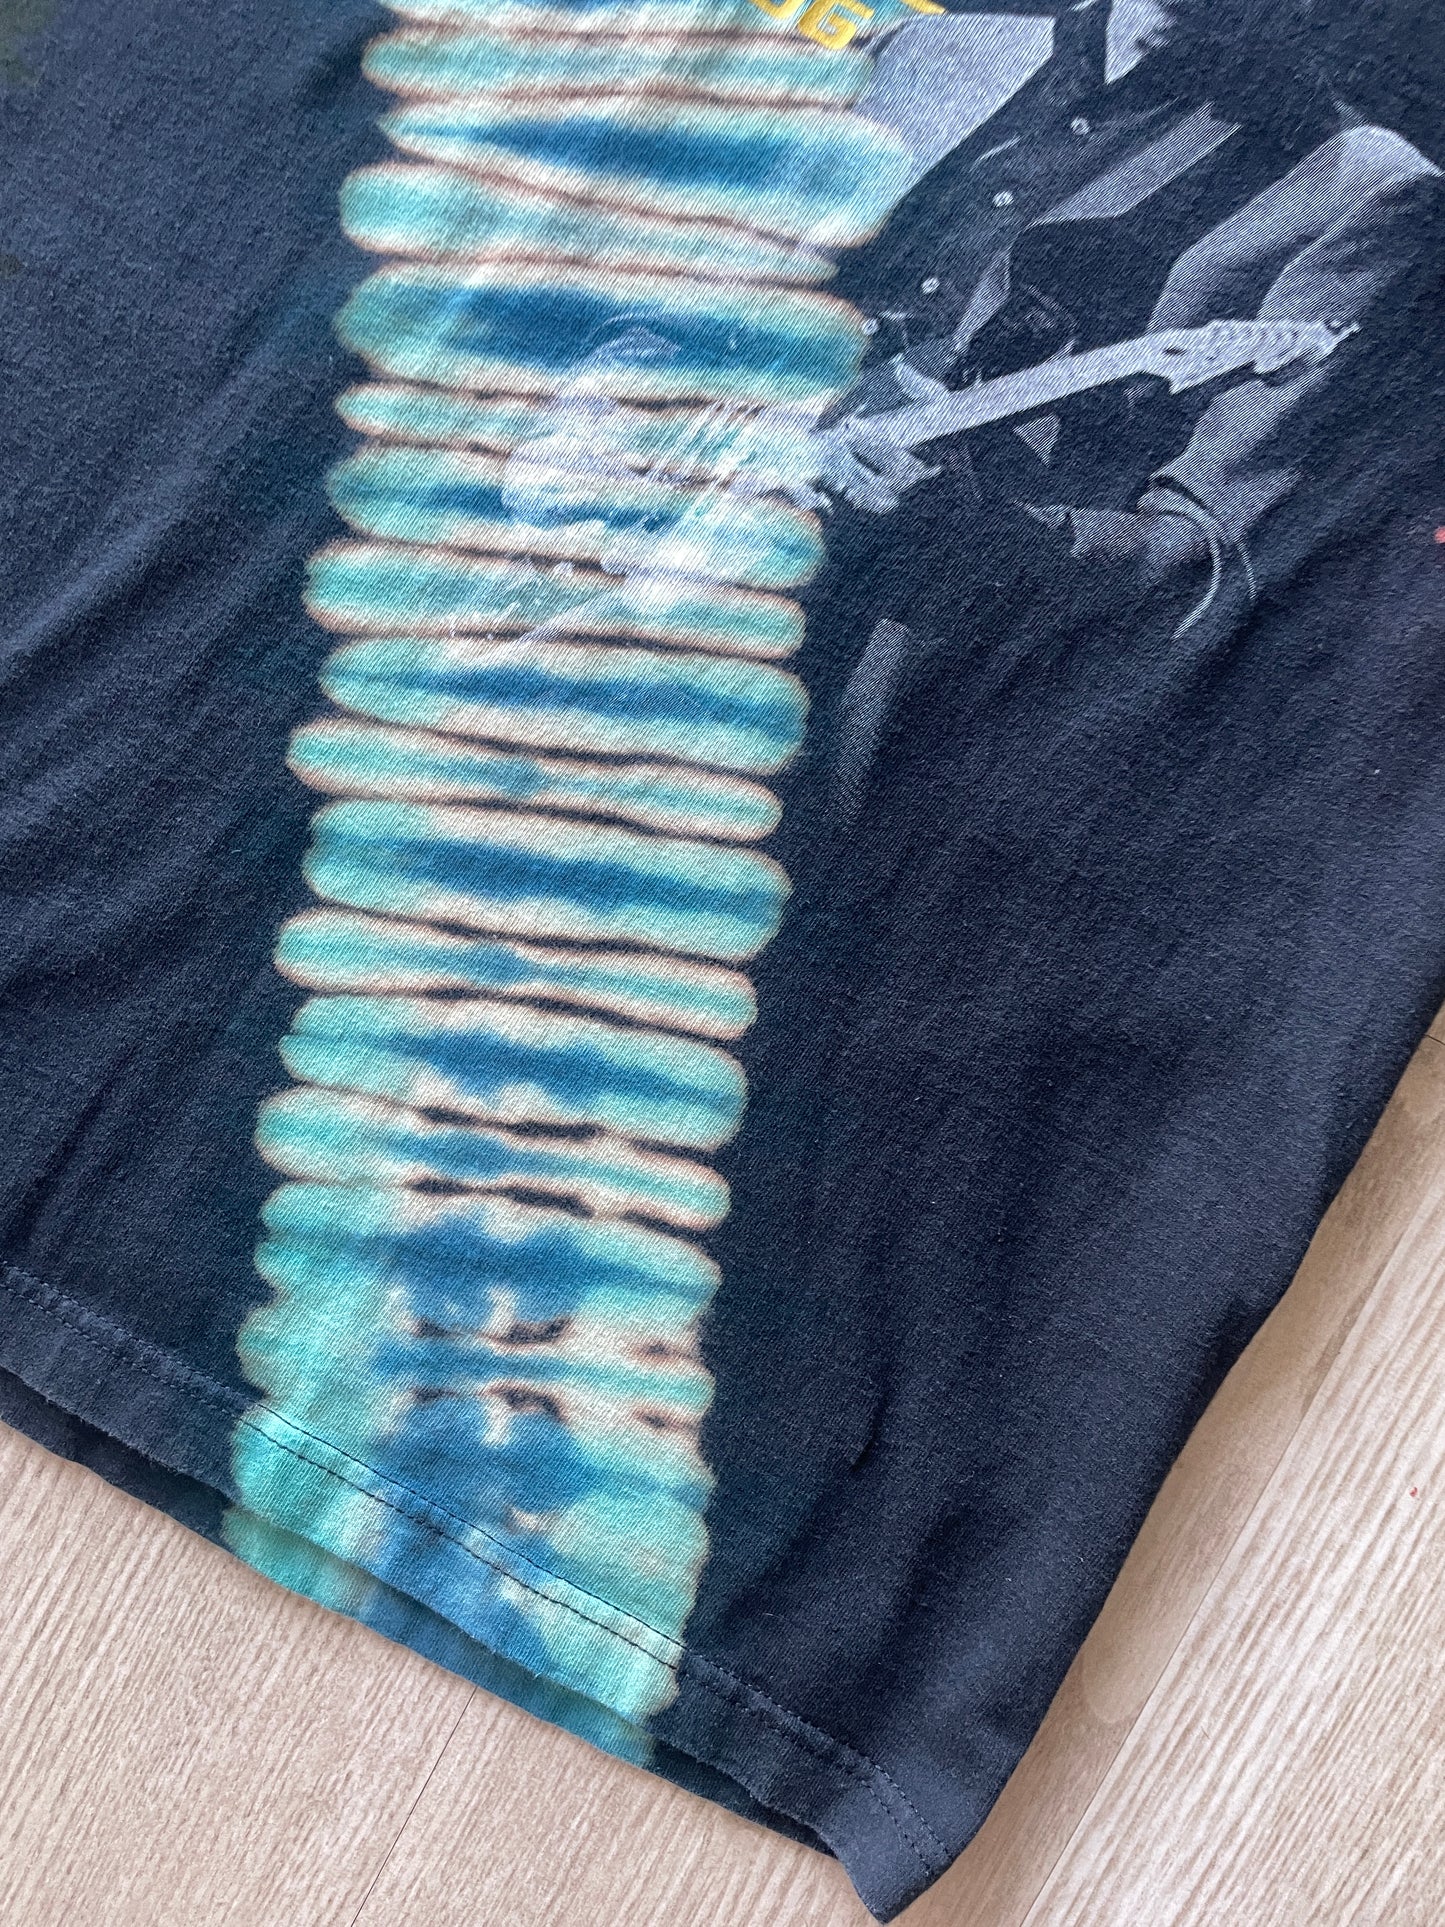 MEDIUM Men’s Eric Clapton 2007 Tour Handmade Reverse Tie Dye Short Sleeve Double-sided T-Shirt | One-Of-a-Kind Upcycled Black and Blue Top